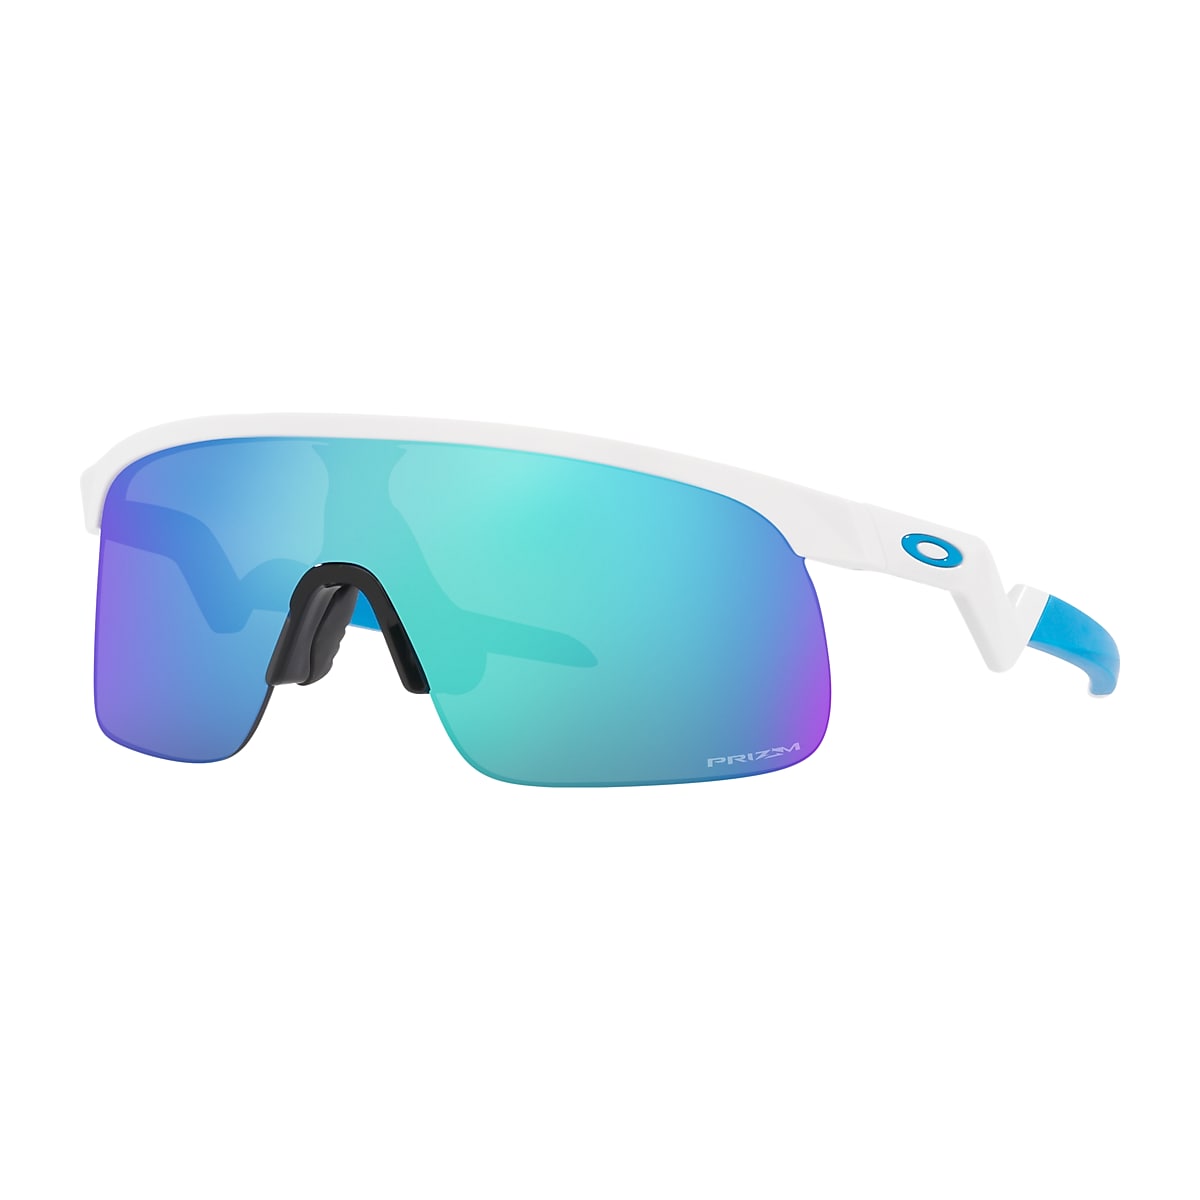 Resistor (Youth Fit) Prizm Sapphire Lenses, Polished White Frame Sunglasses  | Oakley® US